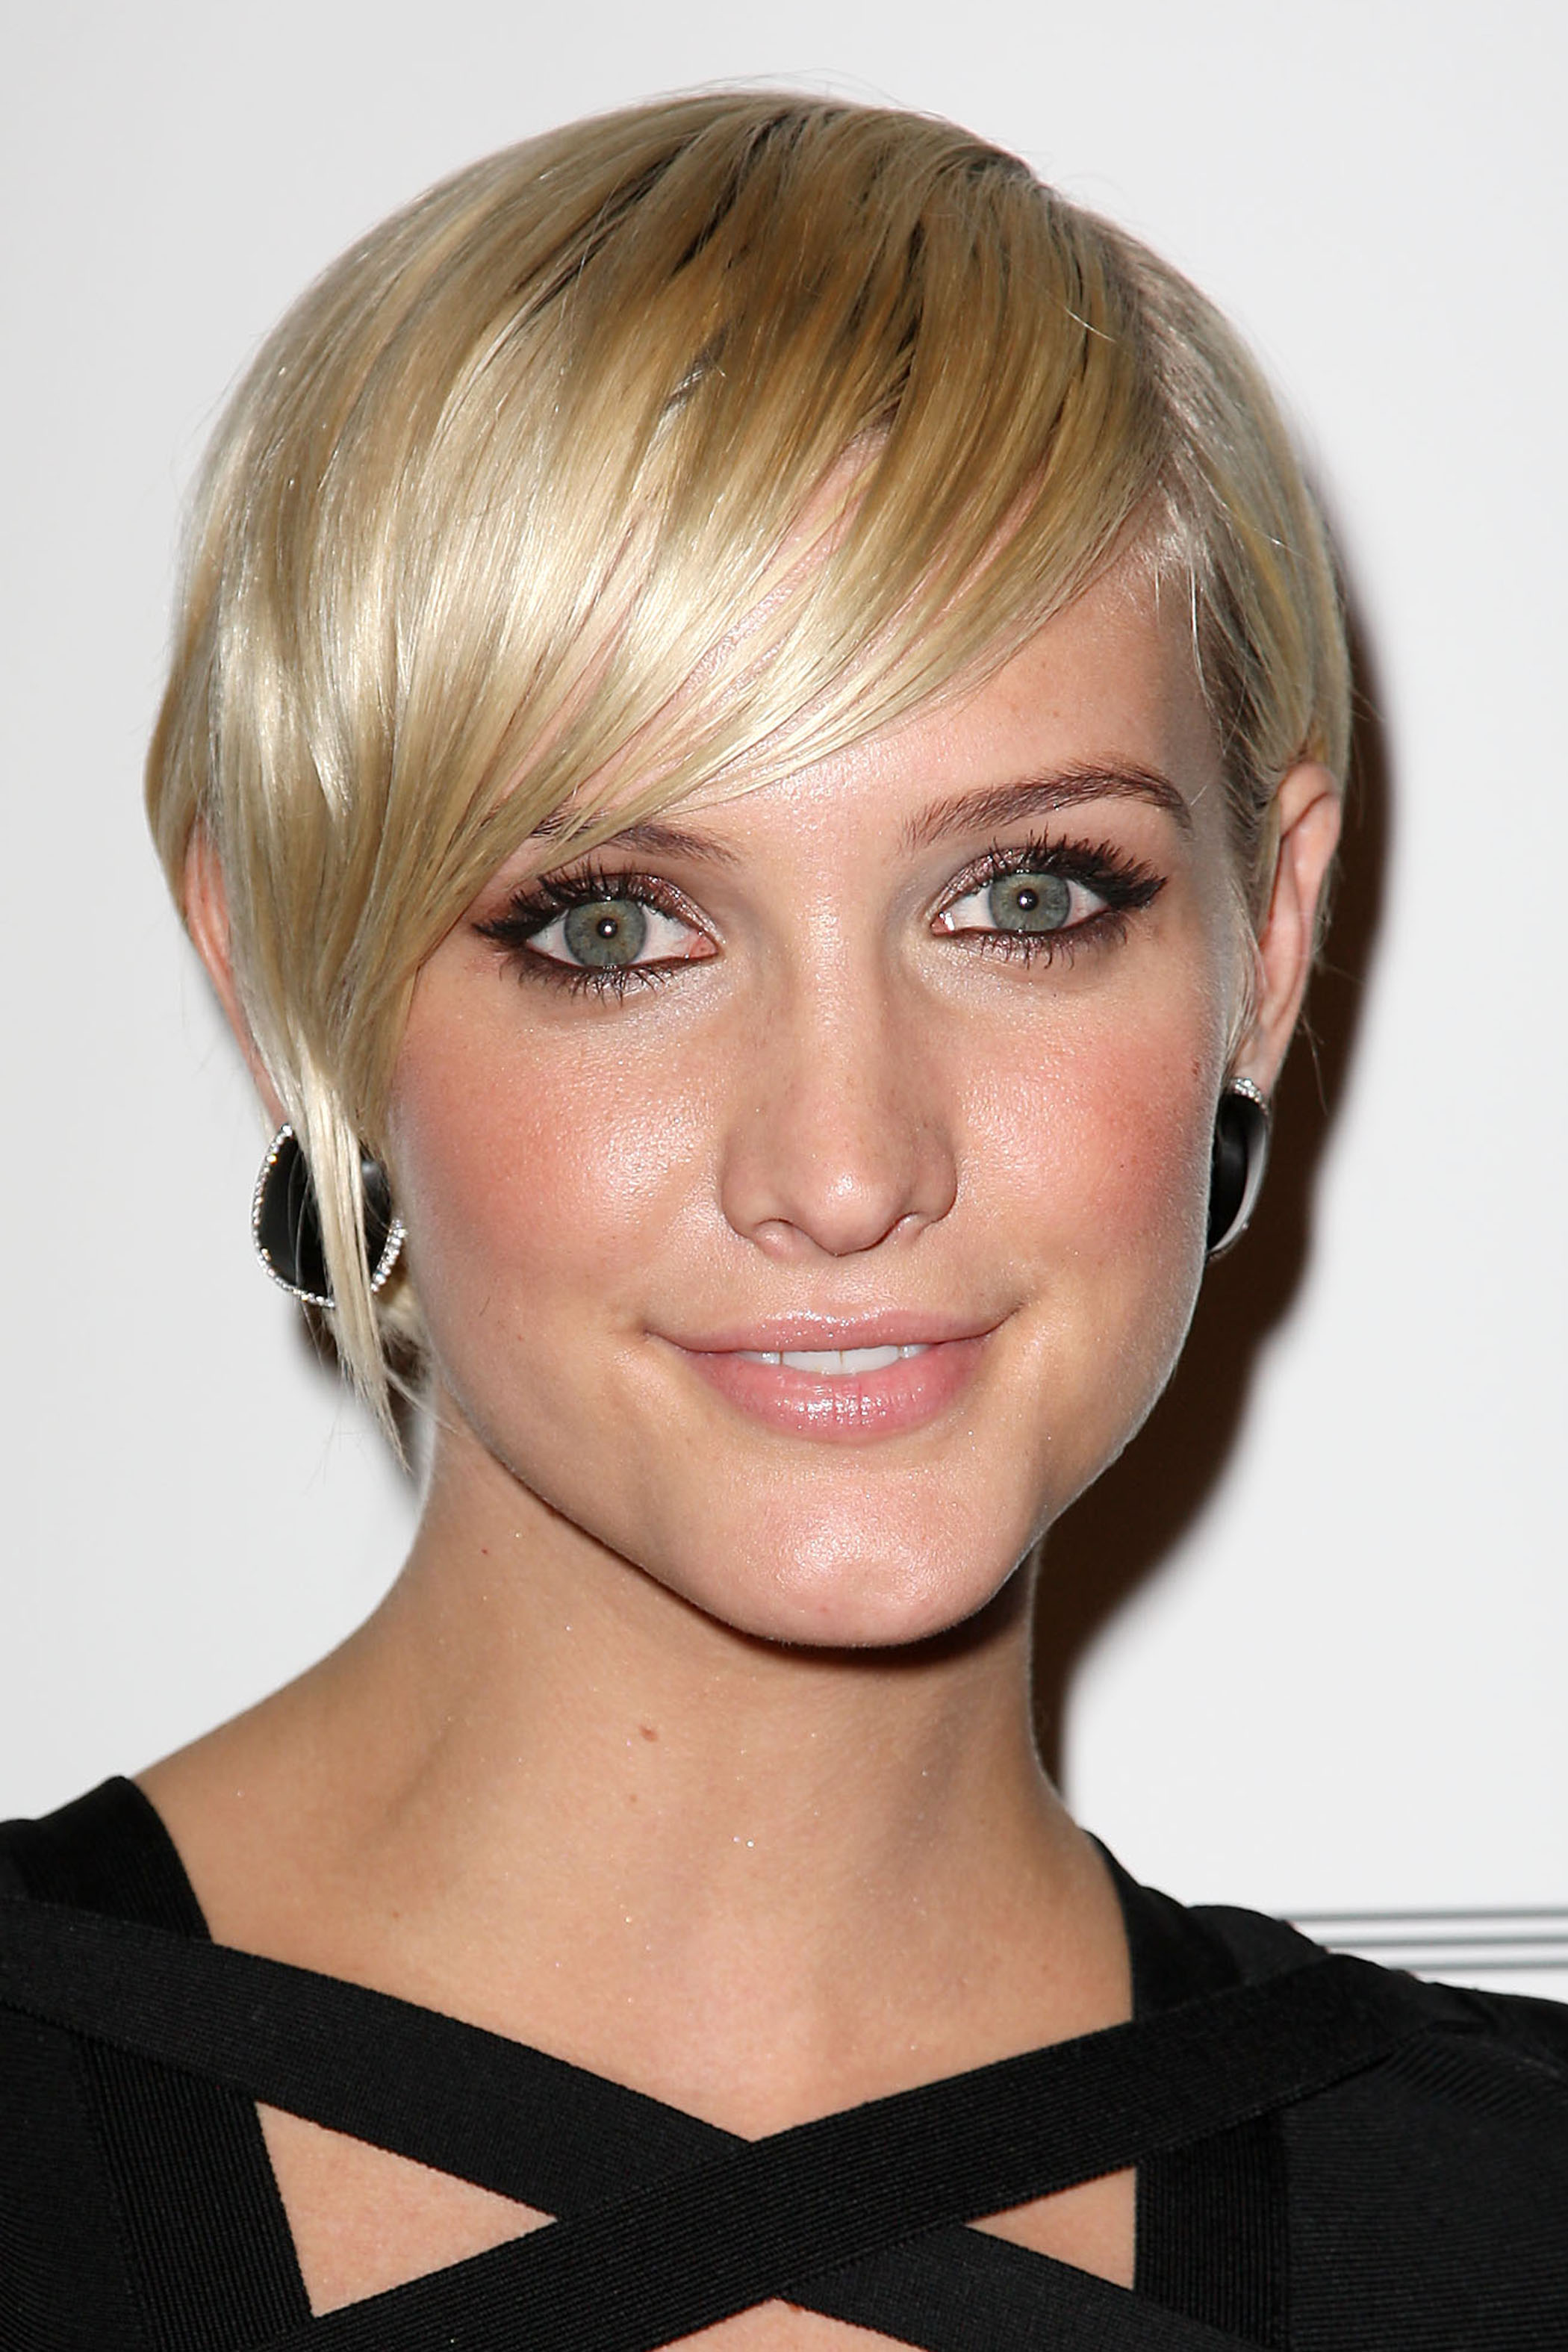 <p><a href="https://www.wonderwall.com/celebrity/profiles/overview/ashlee-simpson-237.article">Ashlee Simpson</a>'s nose -- like her dark hair and edgier vibe -- ultimately disappeared. The singer, who showed off her new appearance at an event in New York City in 2011, famously changed up her look shortly after she gave an interview to Marie Claire in which she railed against the impossible standards of beauty in Hollywood. Oops.</p>